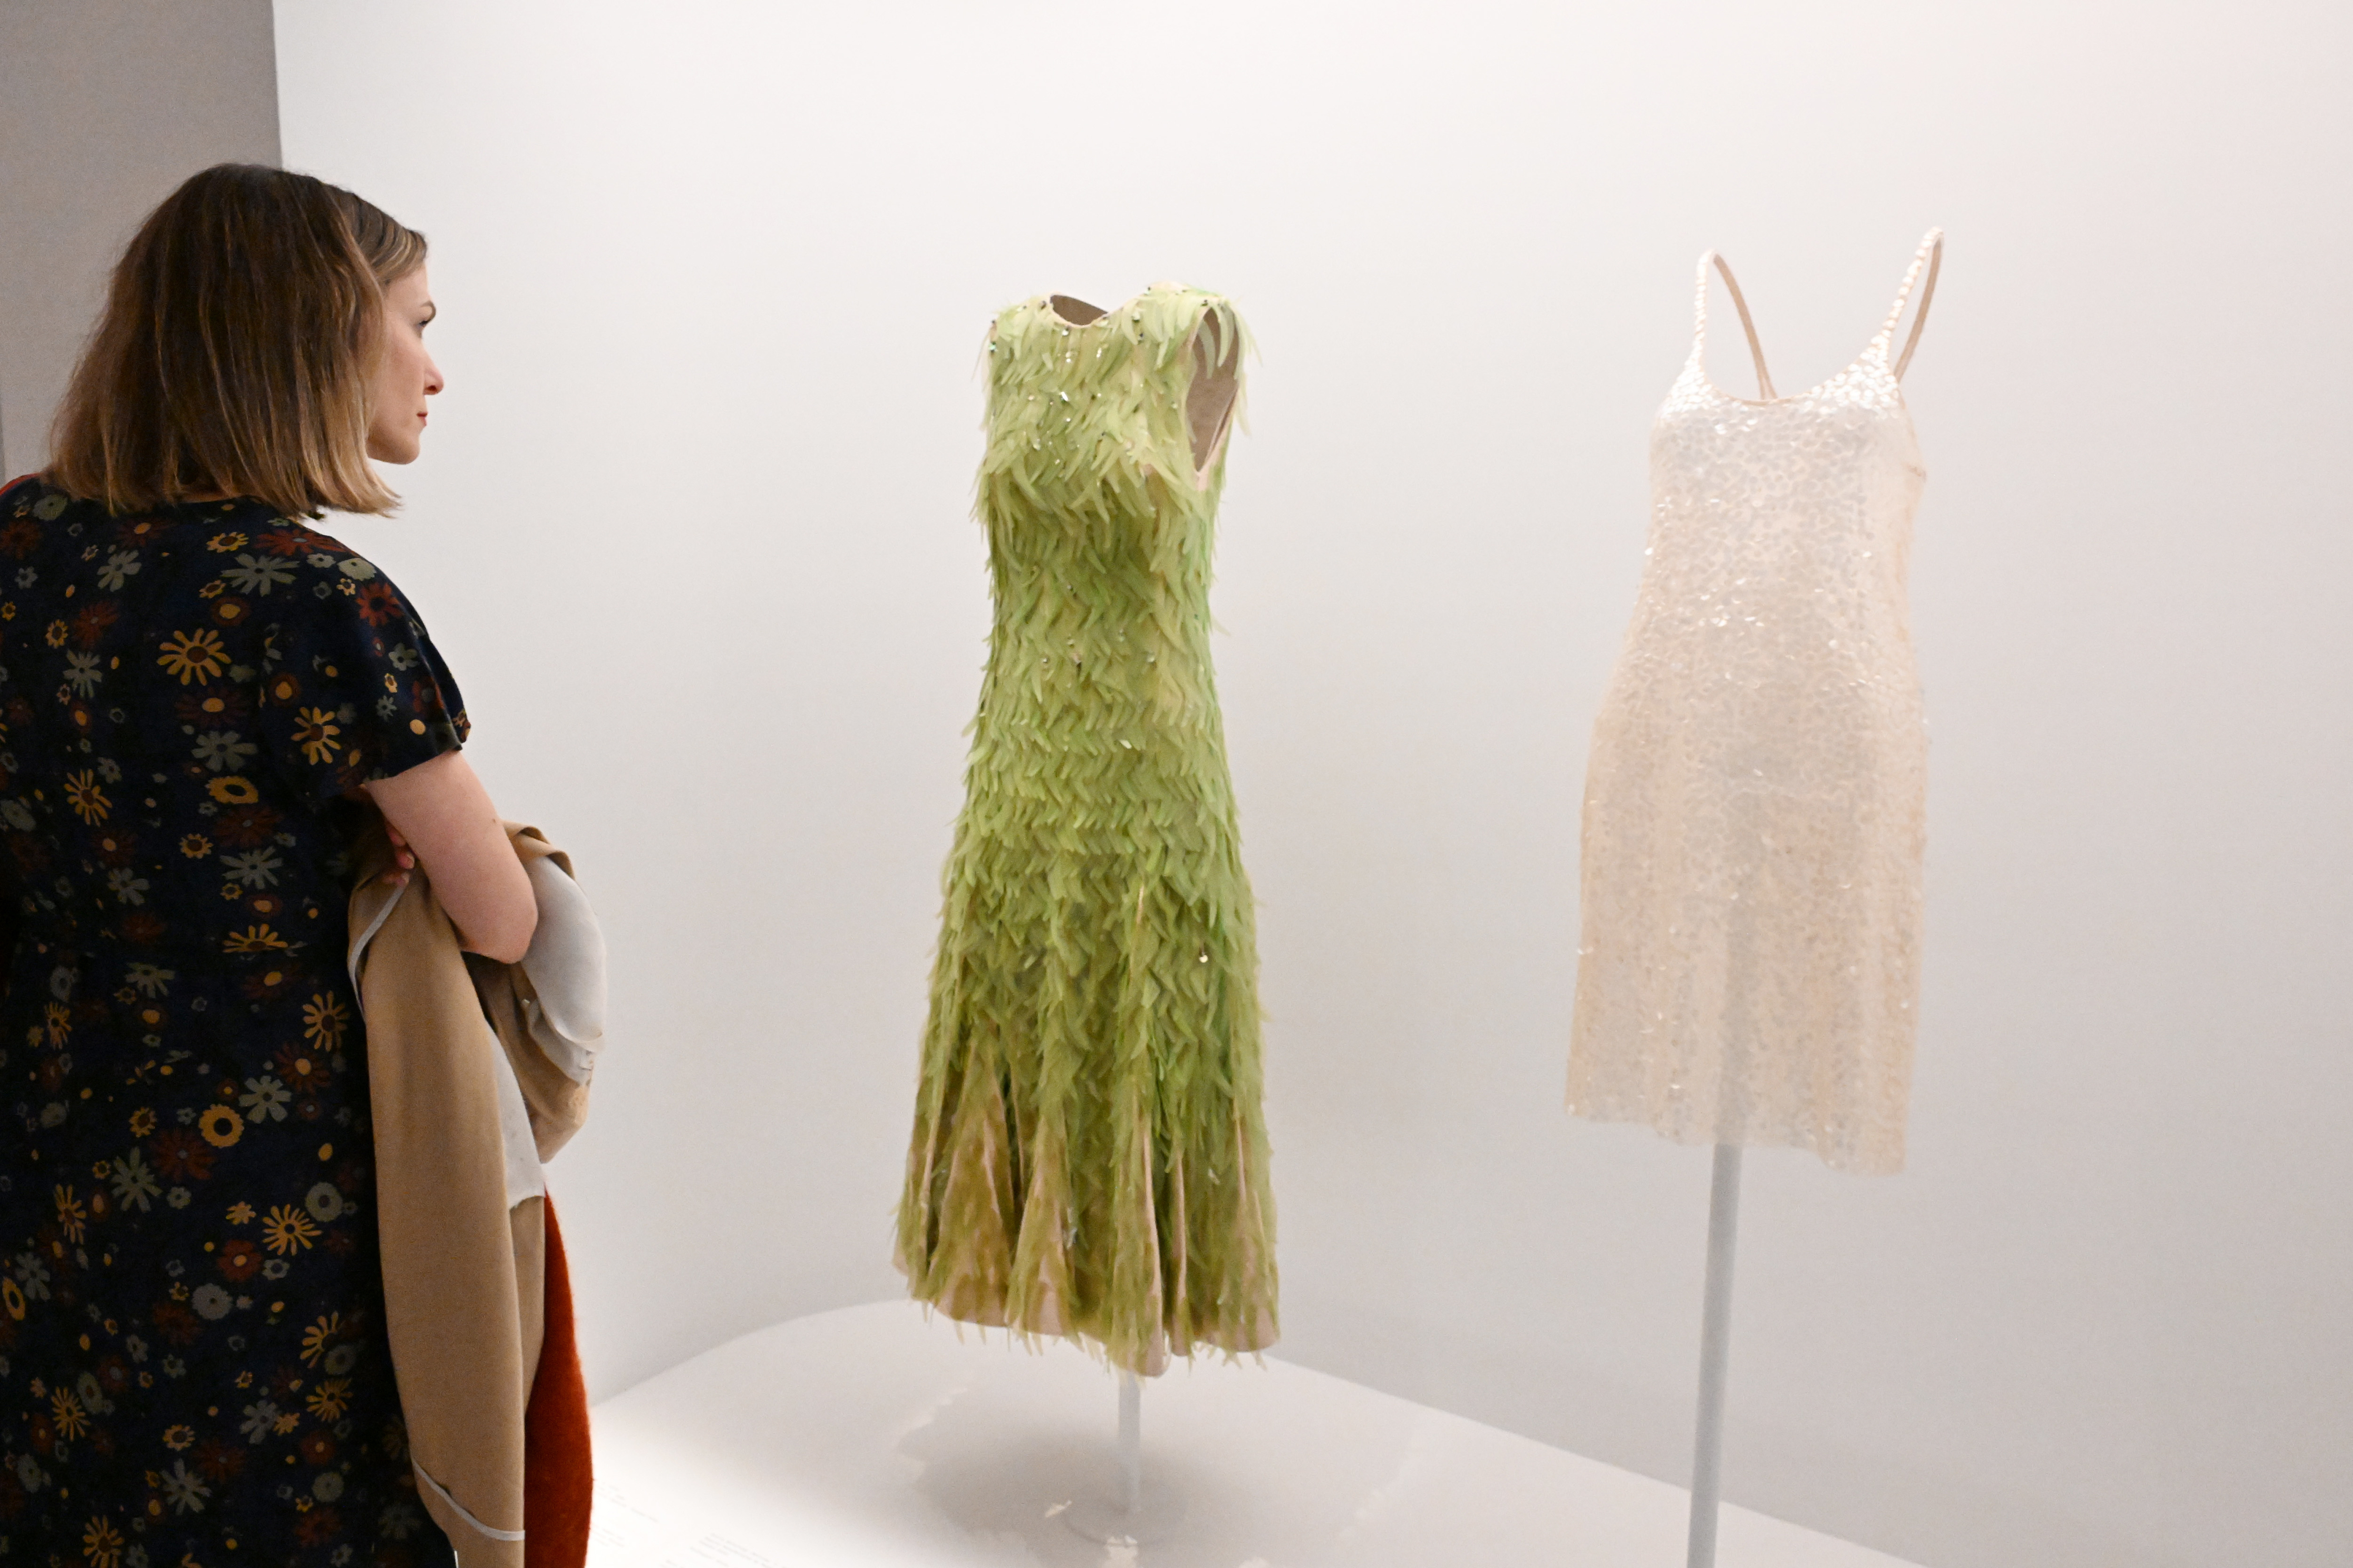 Woman viewing two elegant dresses on display